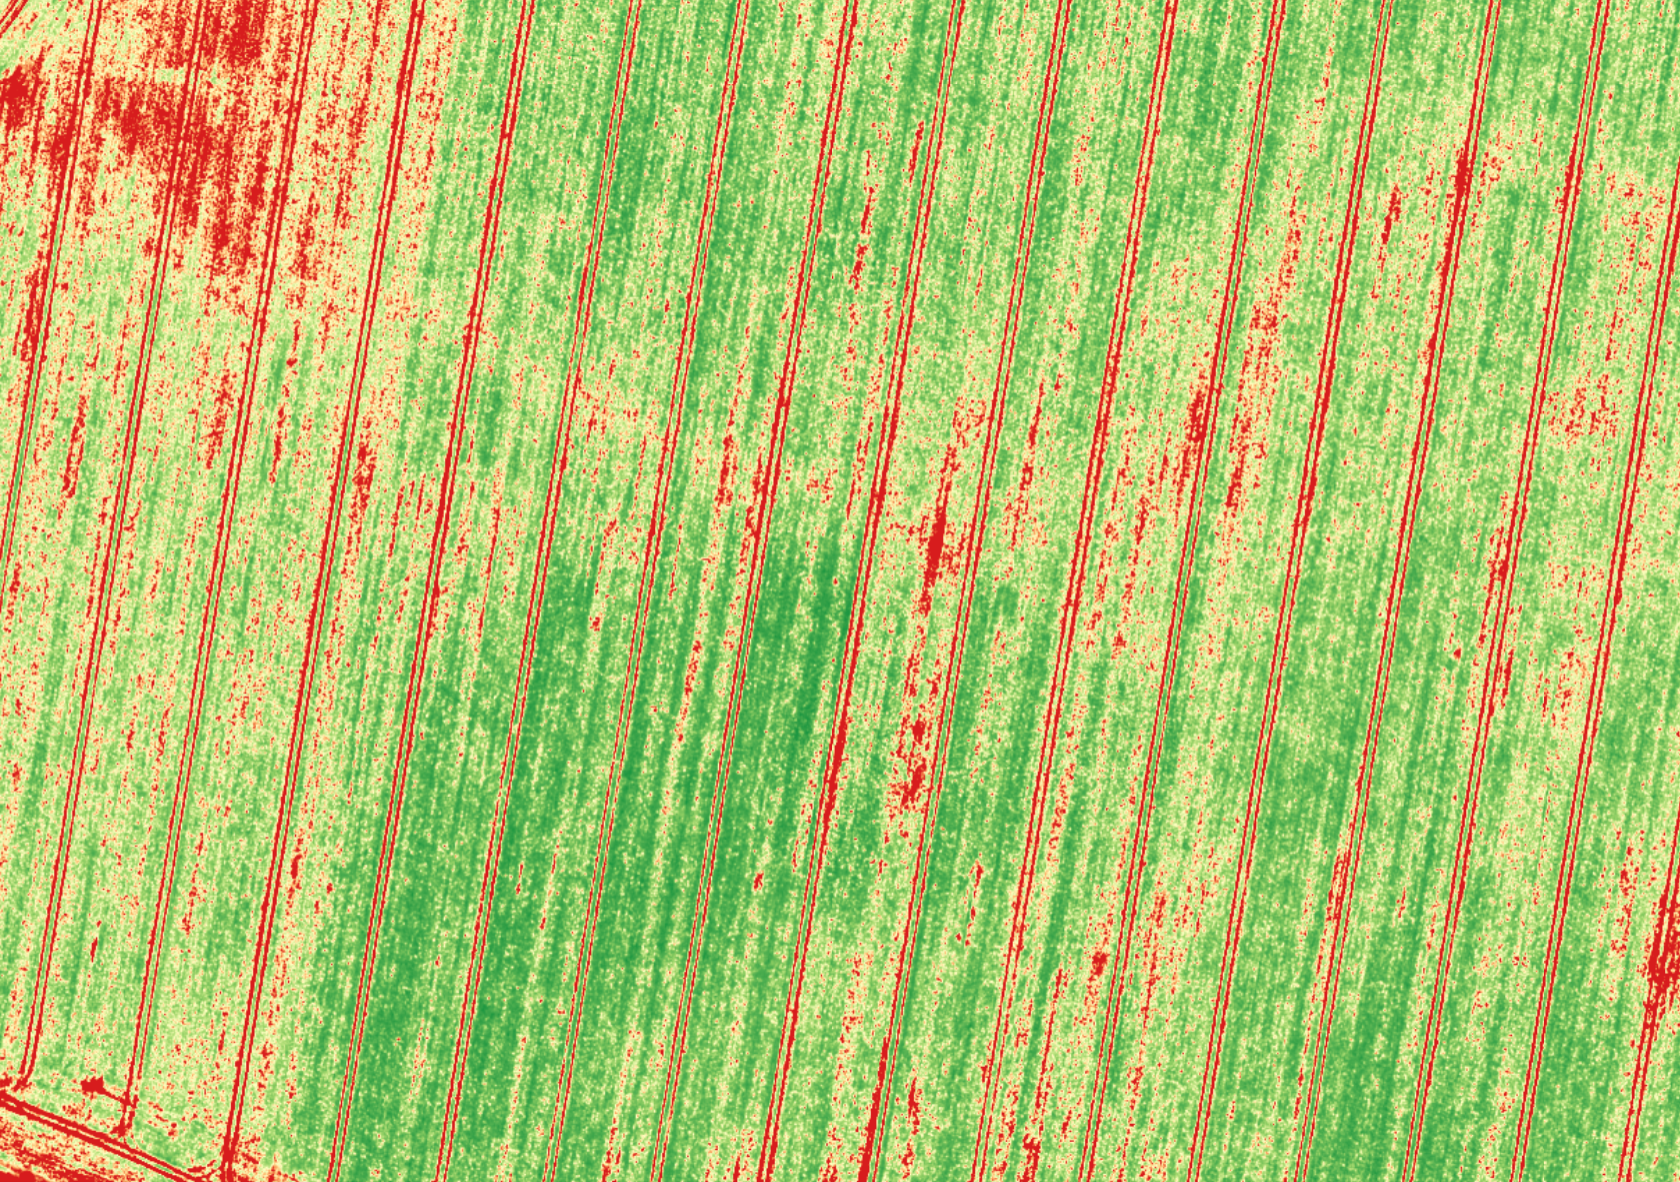 Hyperspectral image of crops